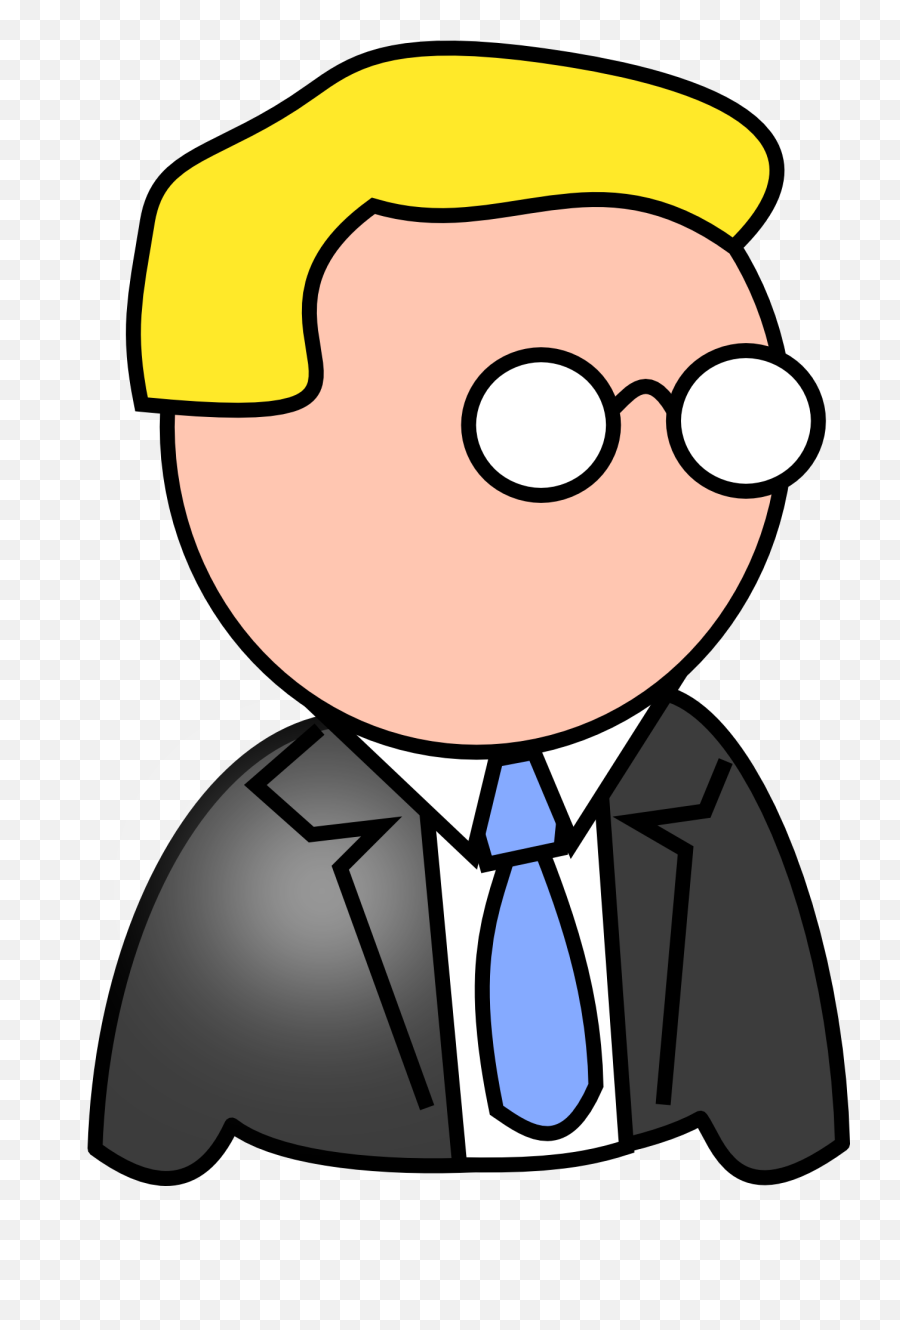 Clipart Of Businessman Avatar Free Image Download Emoji,Business Man Clipart